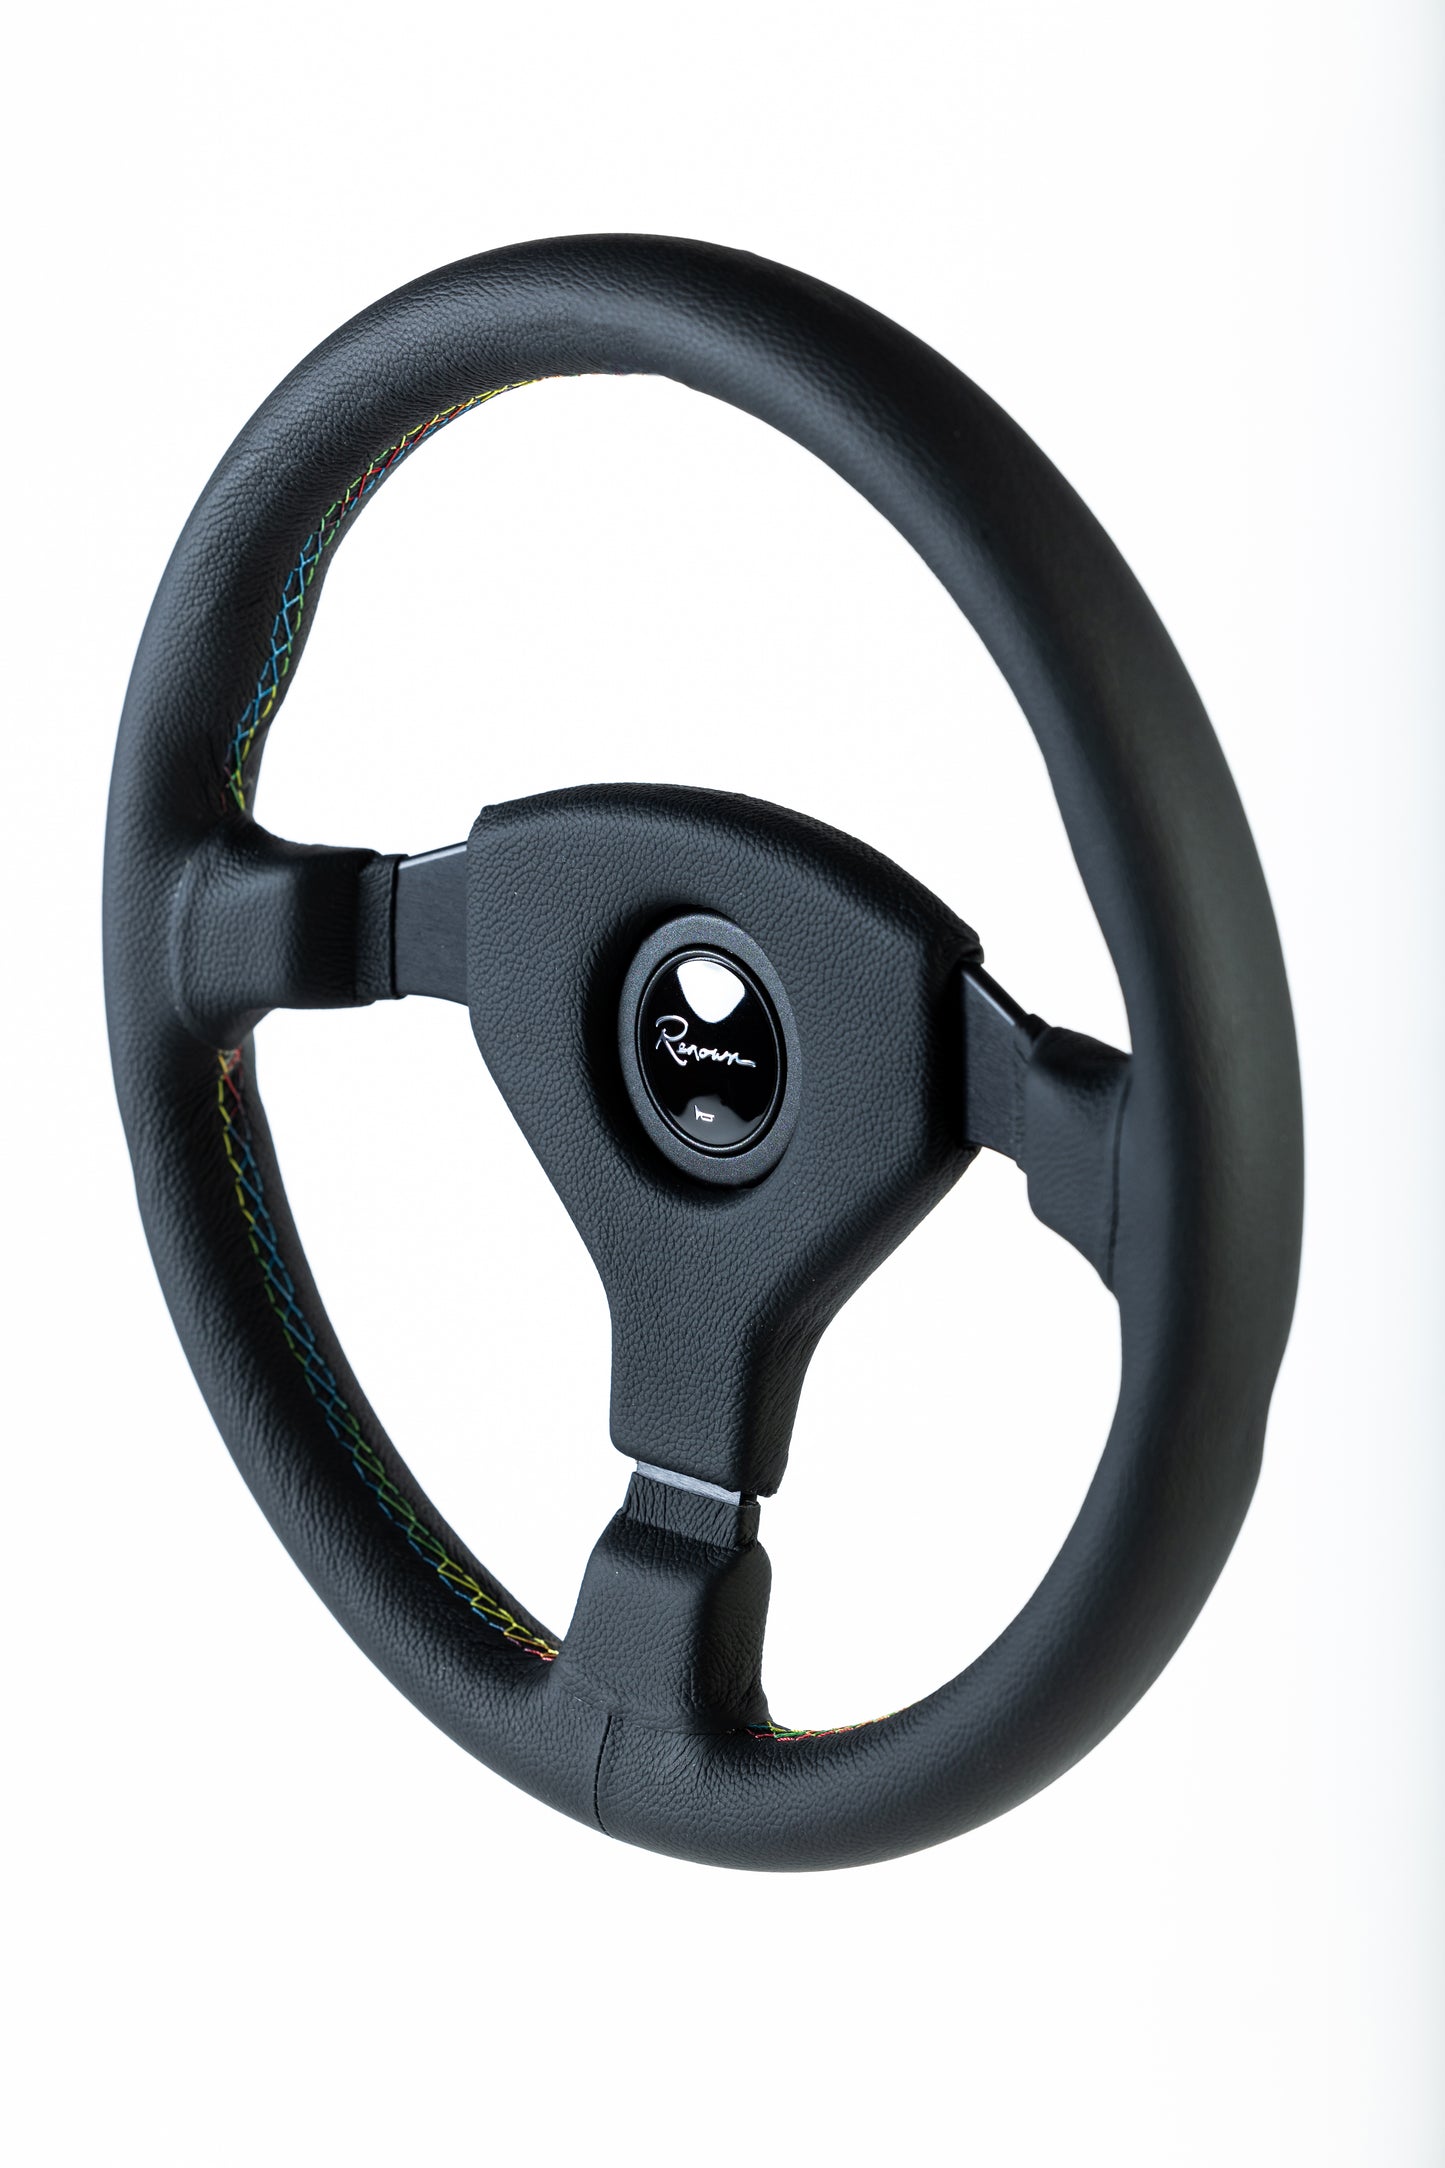 LIMITED Renown Champion Horn Pad Celebration Steering Wheel